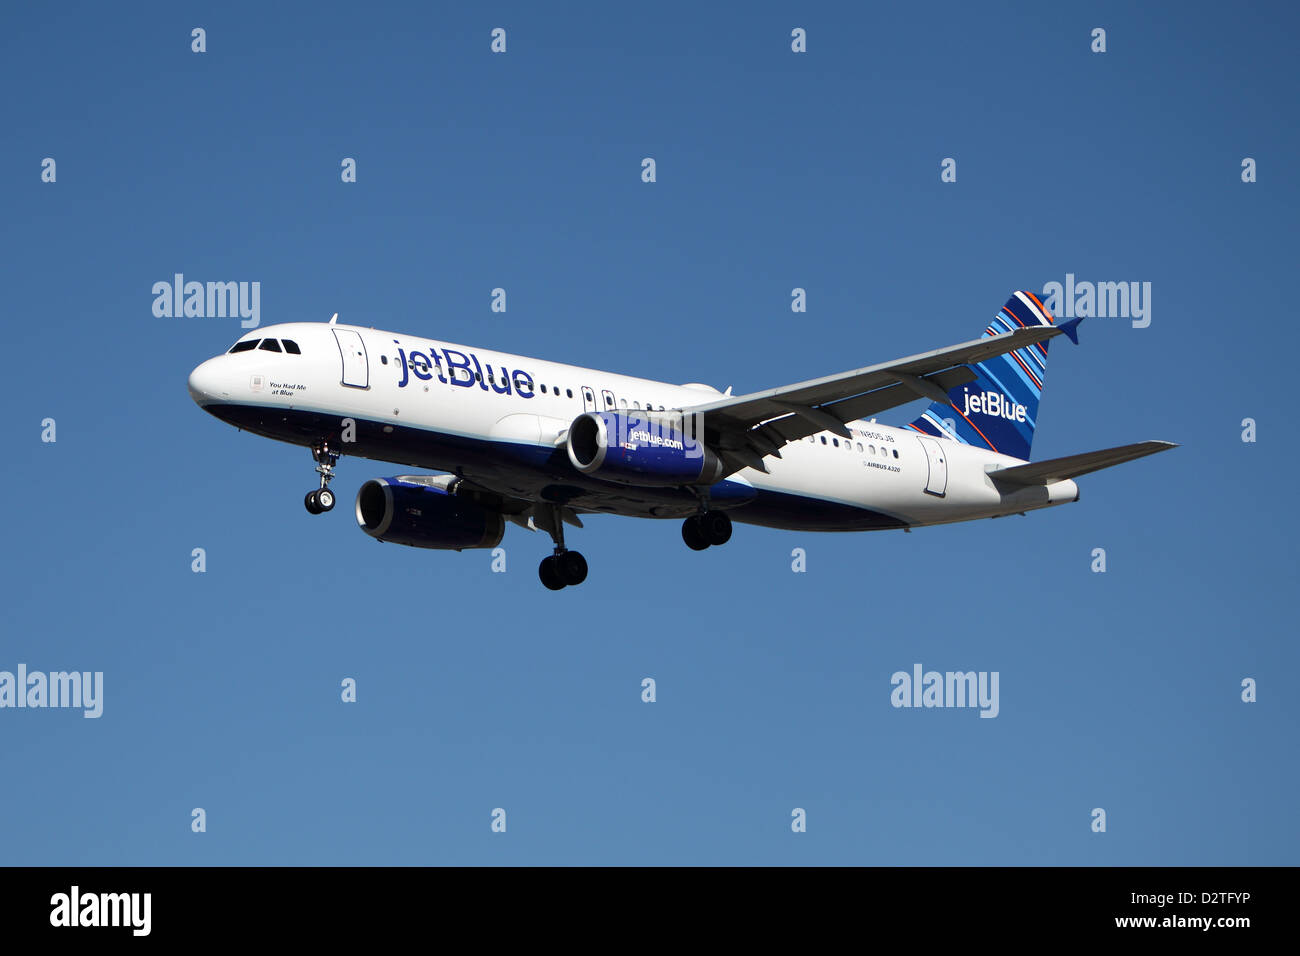 Jetblue Airbus A320-214 lands at Los Angeles Airport on January 28, 2013 Stock Photo